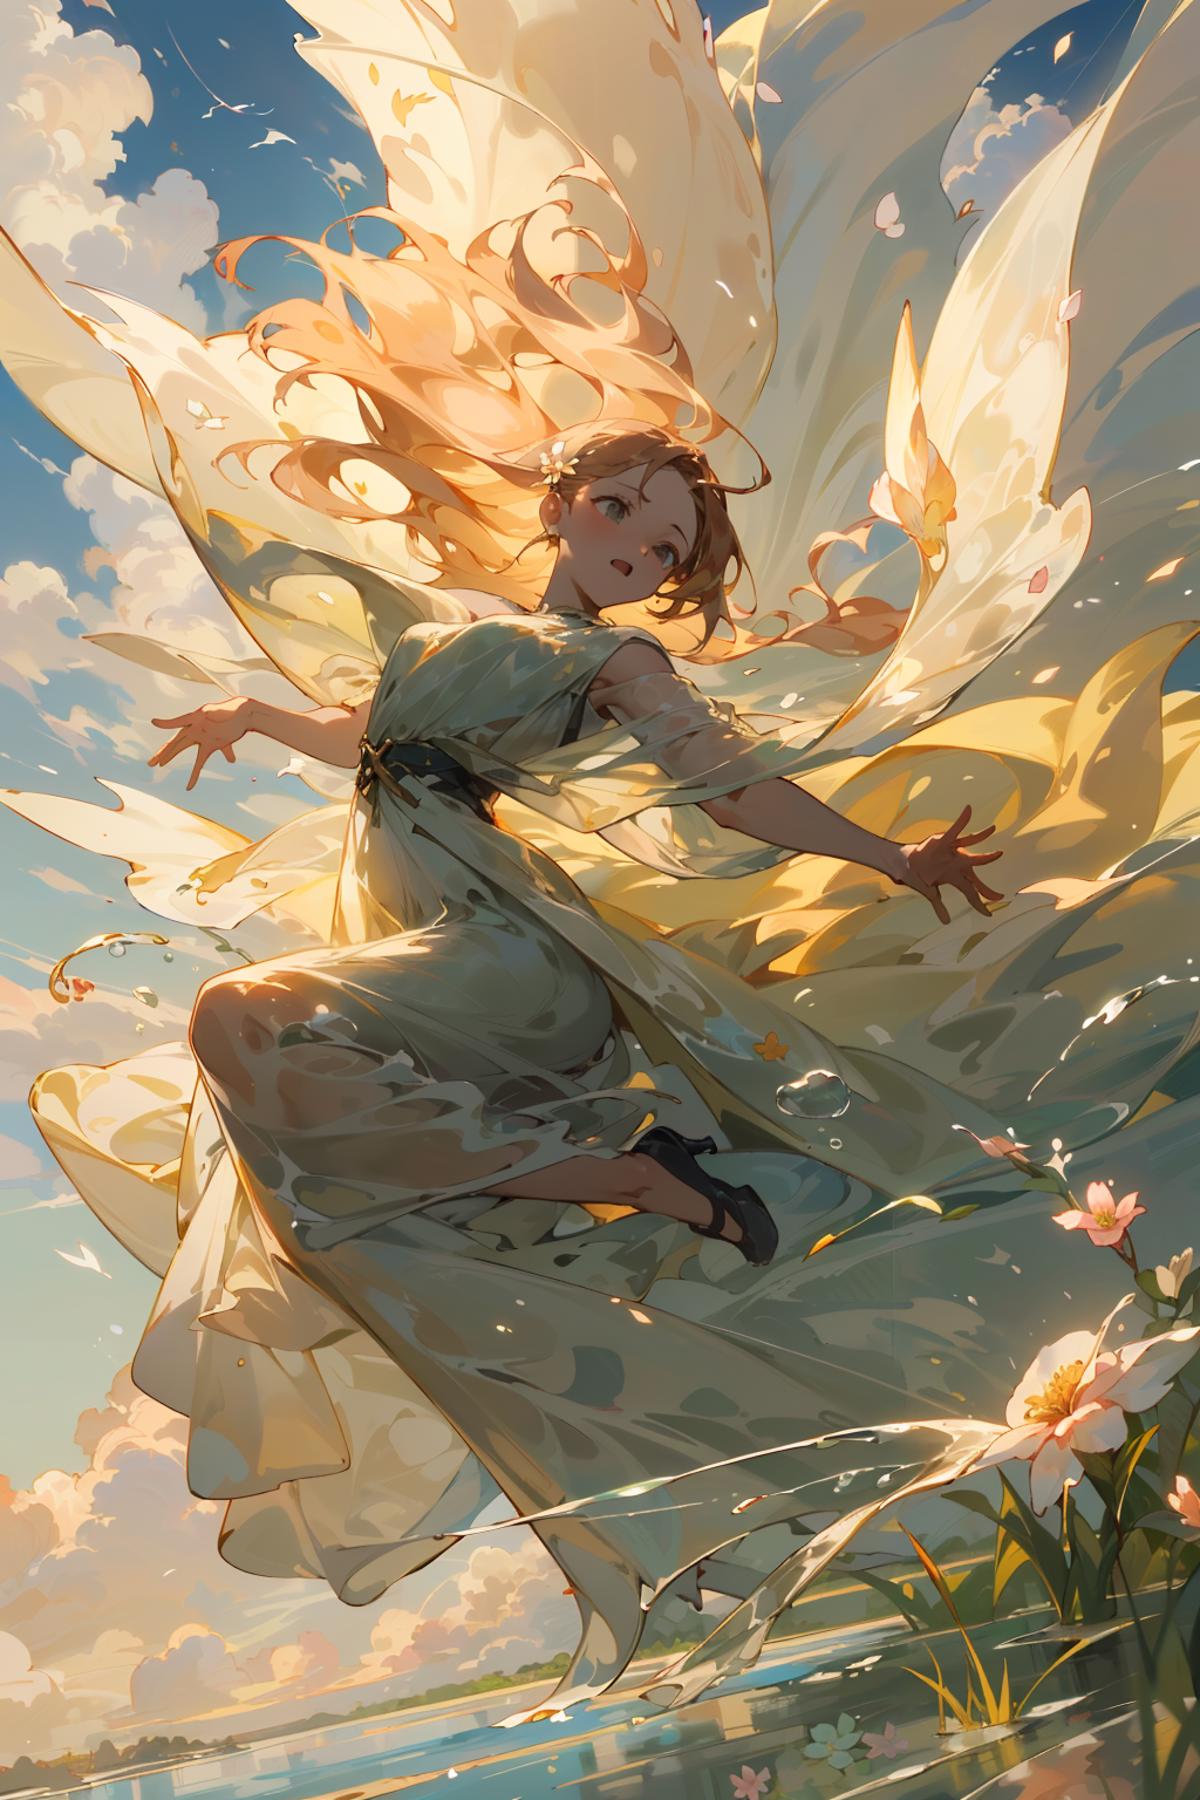 A young woman in a white dress flying through the air surrounded by flowers.